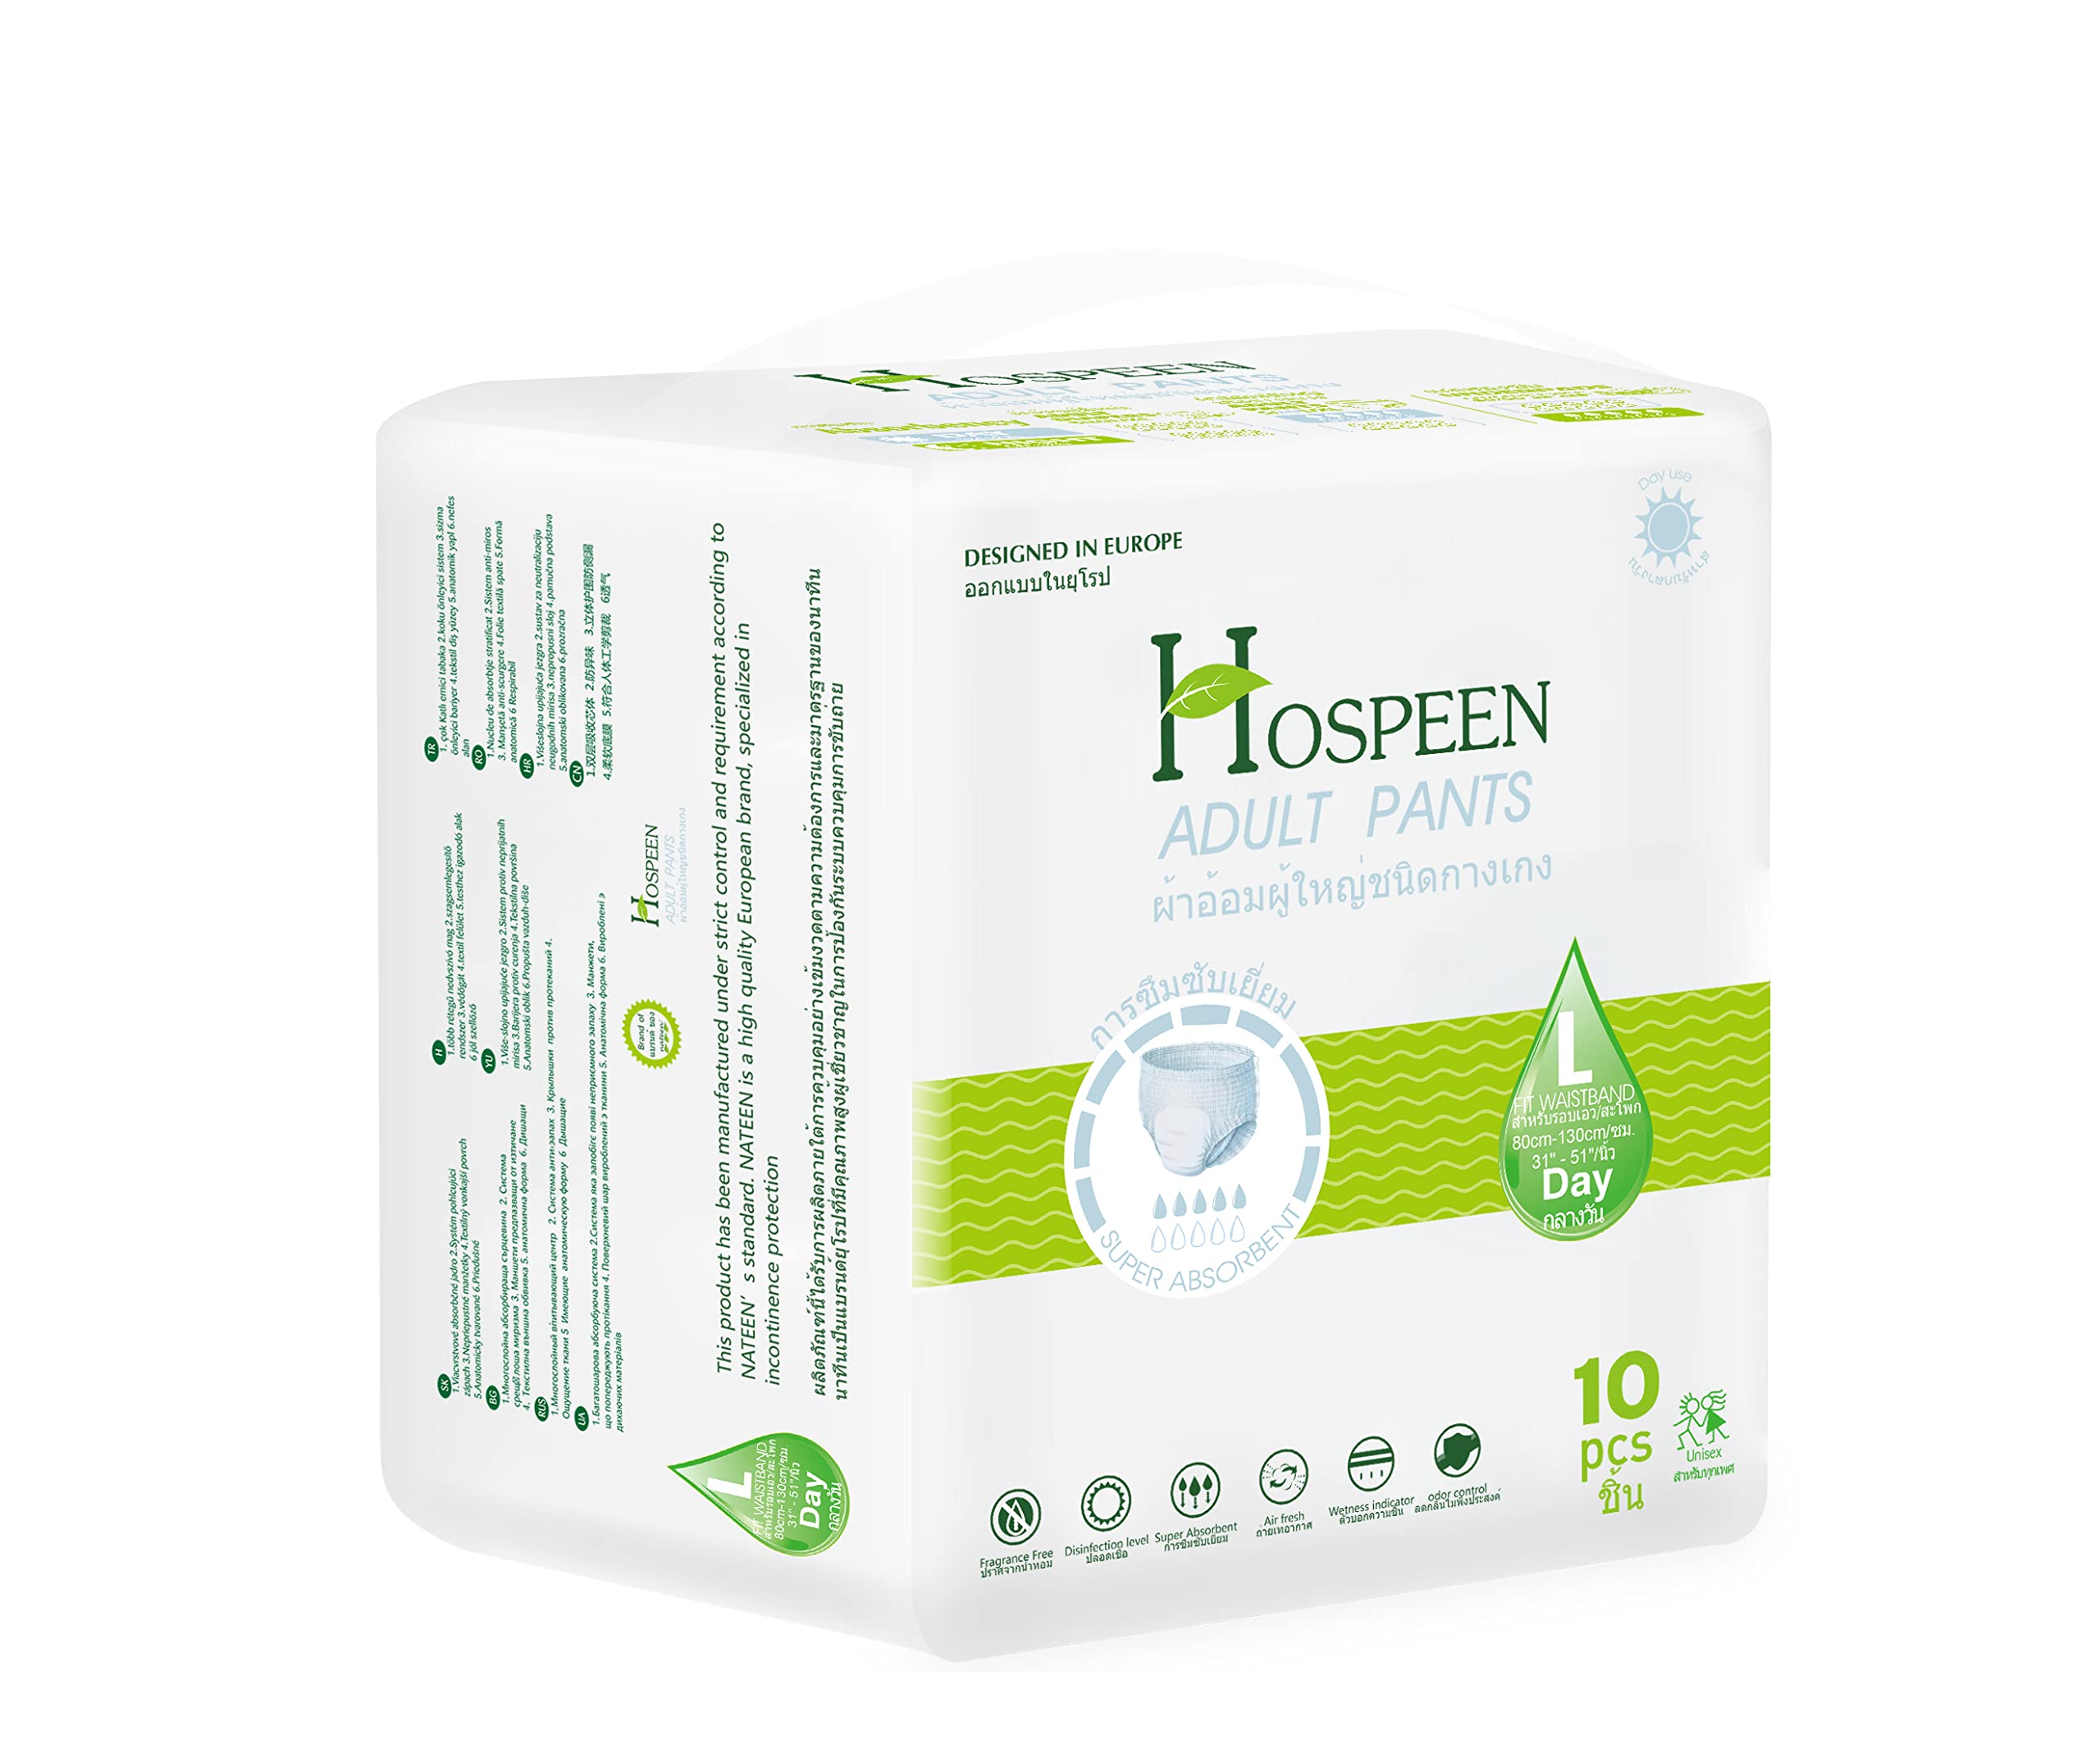 Nateen Hospeen Adult Diapers Pants,Period Panties for Sanitary Protection,Large,Waist Size 80-130cm,10 Count Day Unisex Adult Pull Ups,360 Dgree Elastic Waistband,Super Soft Fit